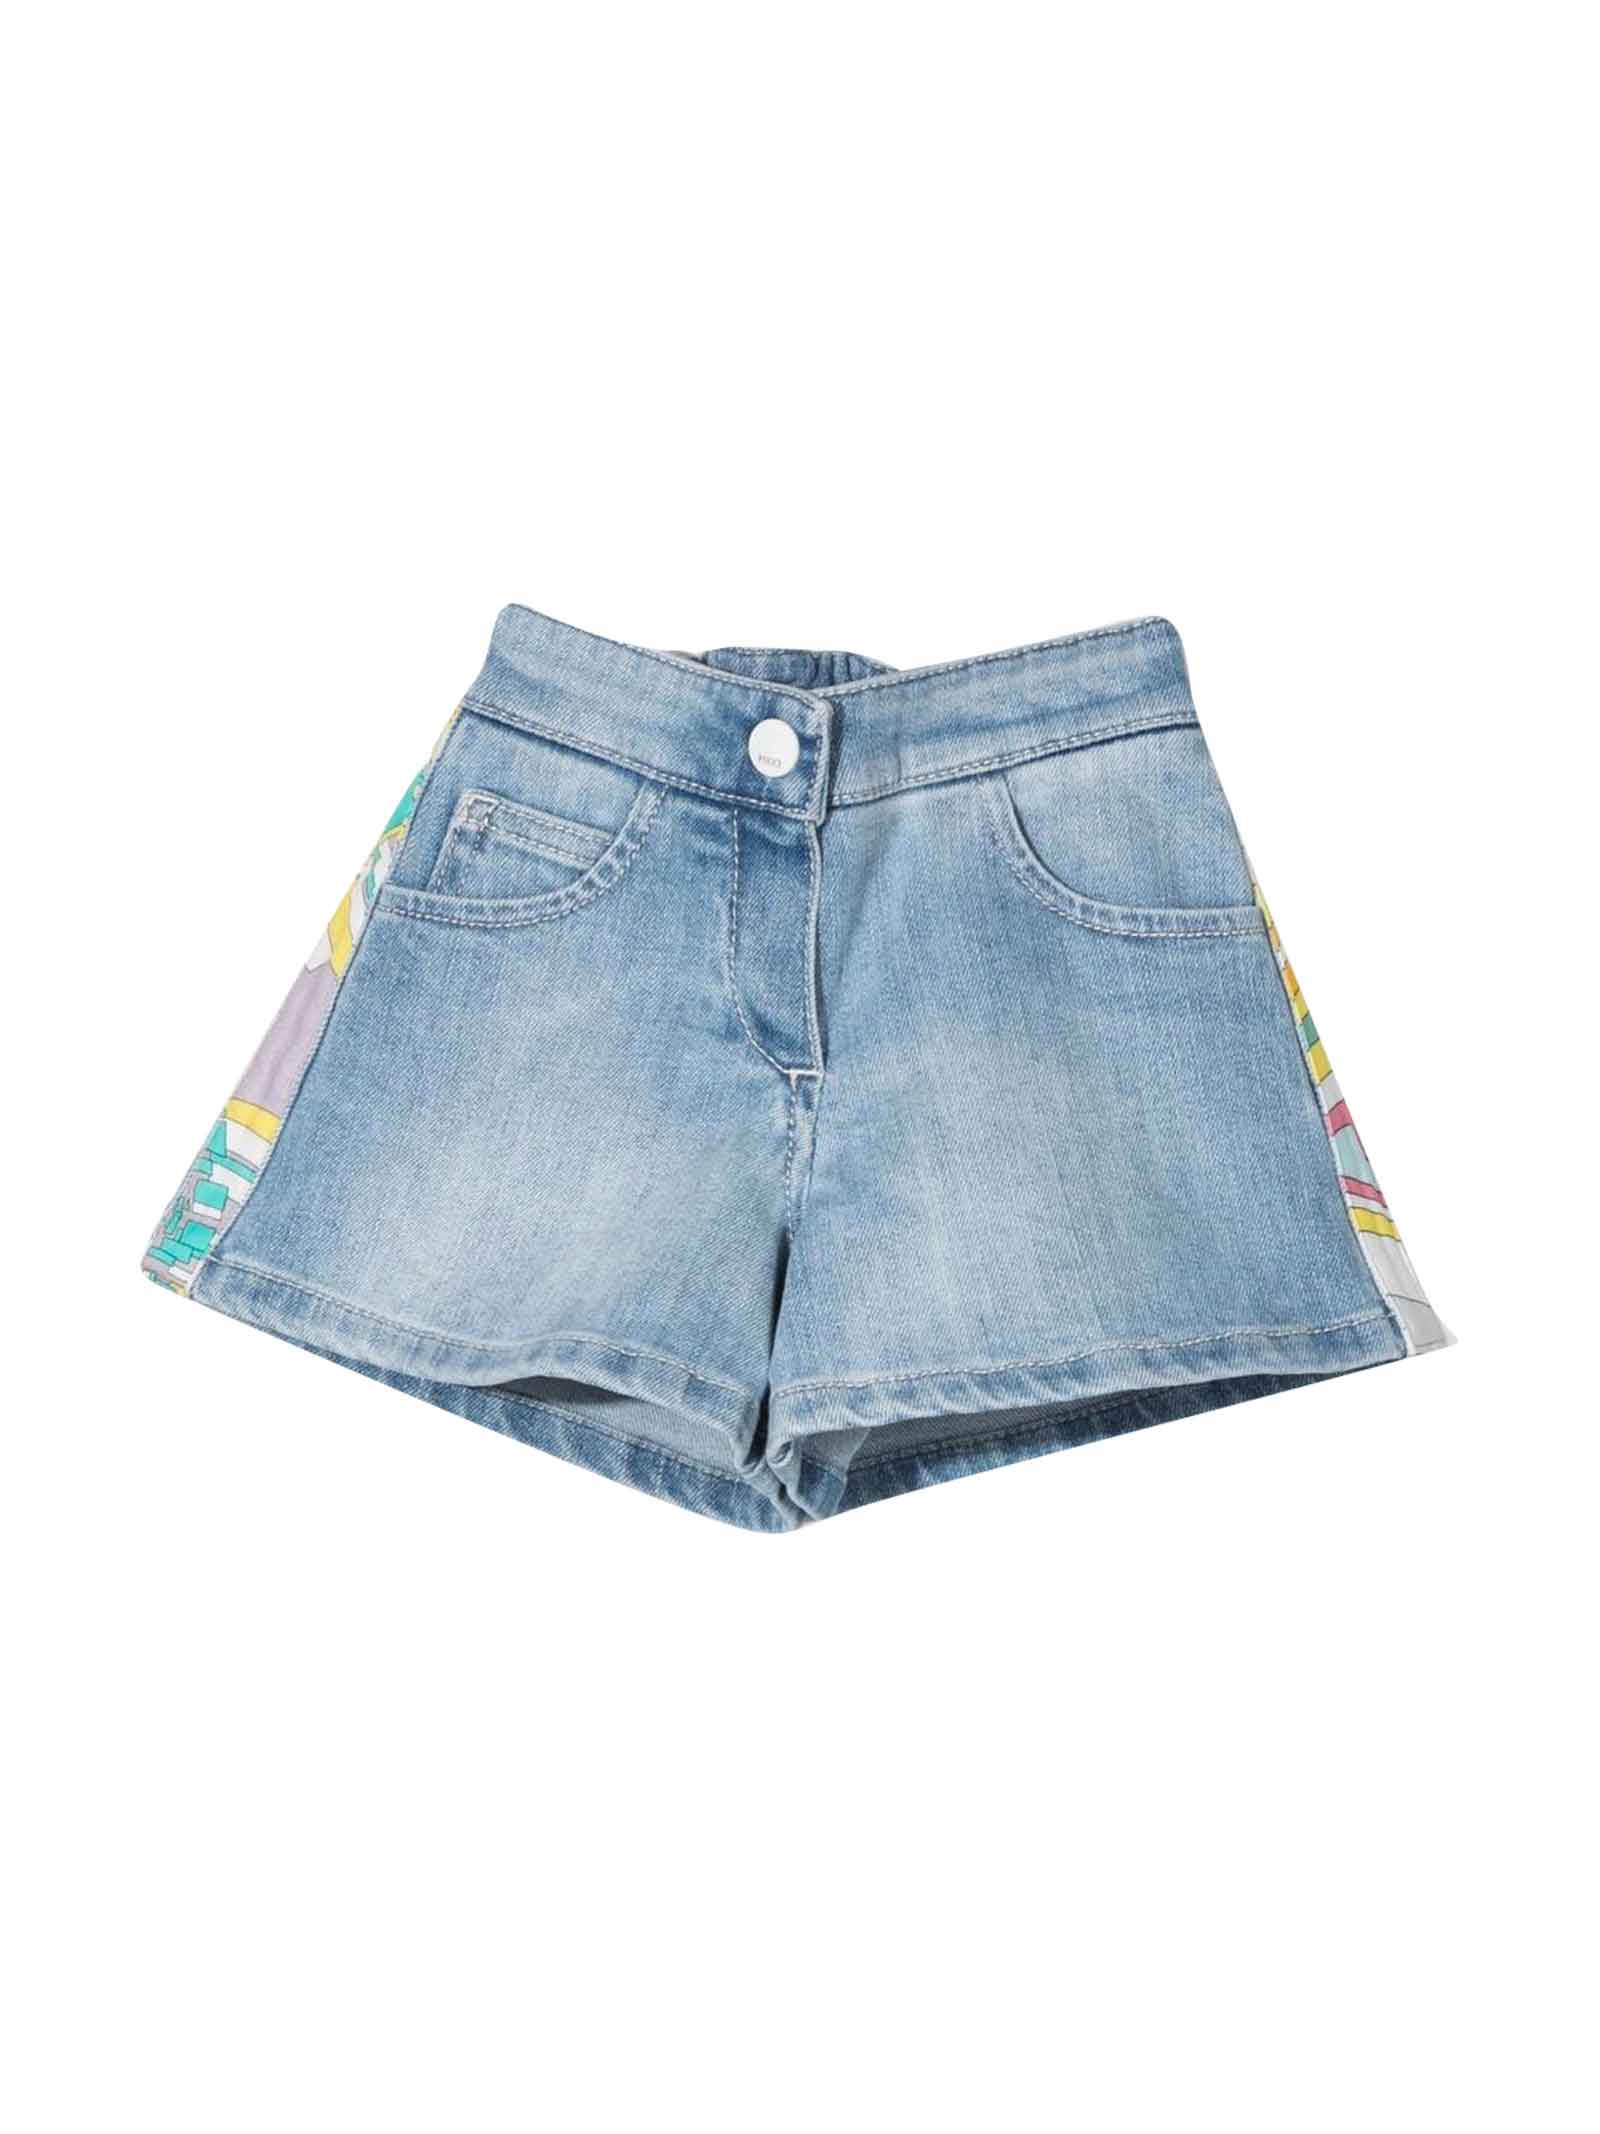 Emilio Pucci Babies' Girl Denim Shorts Elasticated Waist, Button And Zip Front Closure, Classic Five Pocket Design And Pa